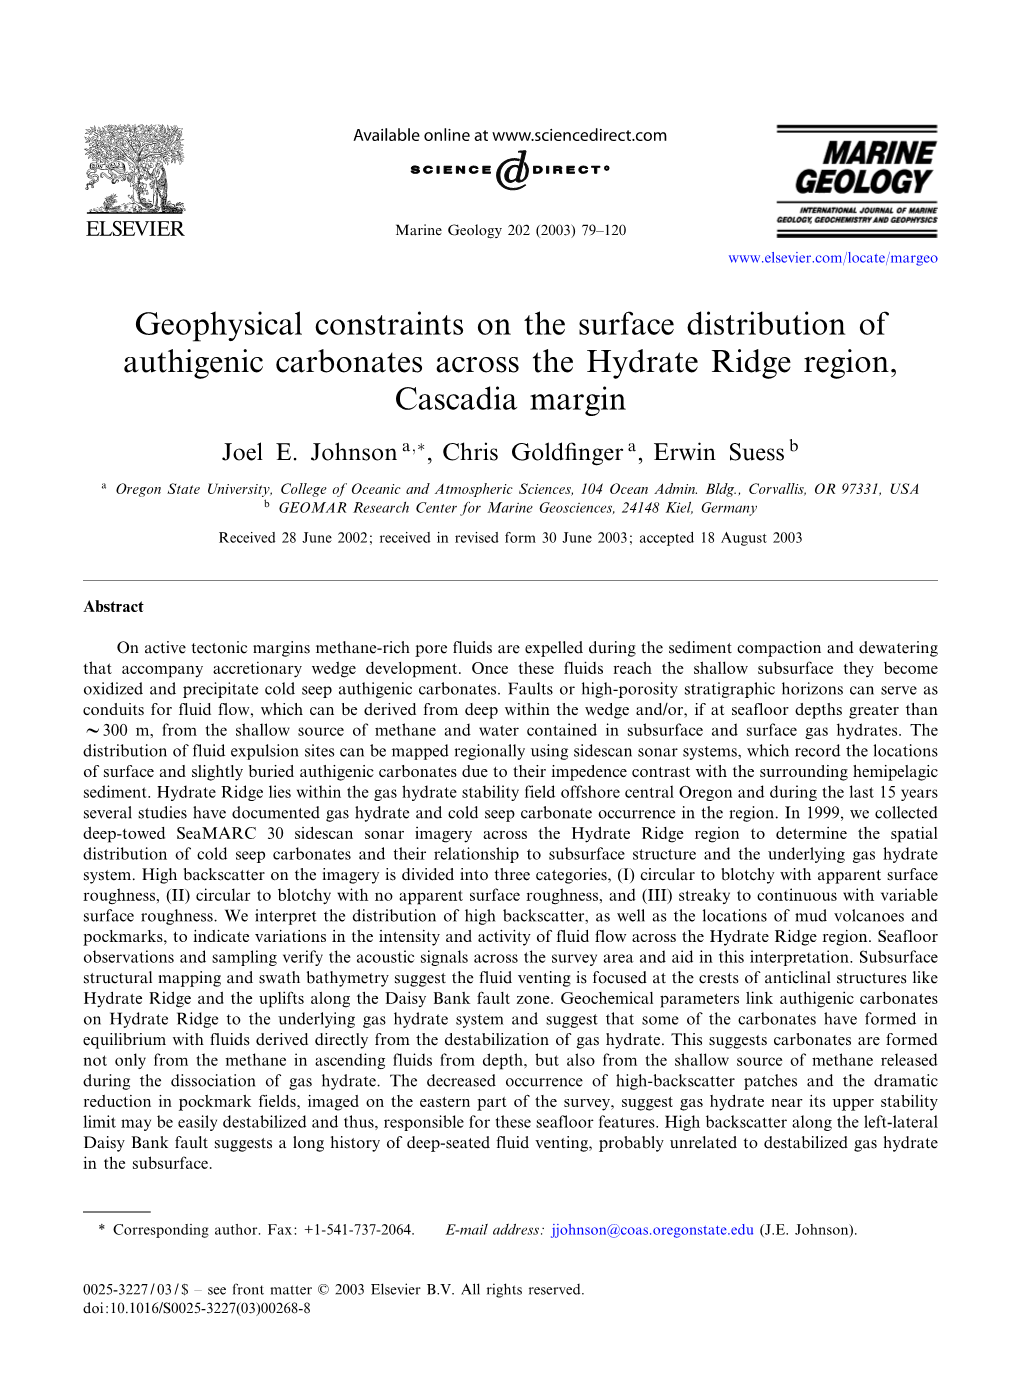 Geophysical Constraints on the Surface Distribution of Authigenic Carbonates Across the Hydrate Ridge Region, Cascadia Margin